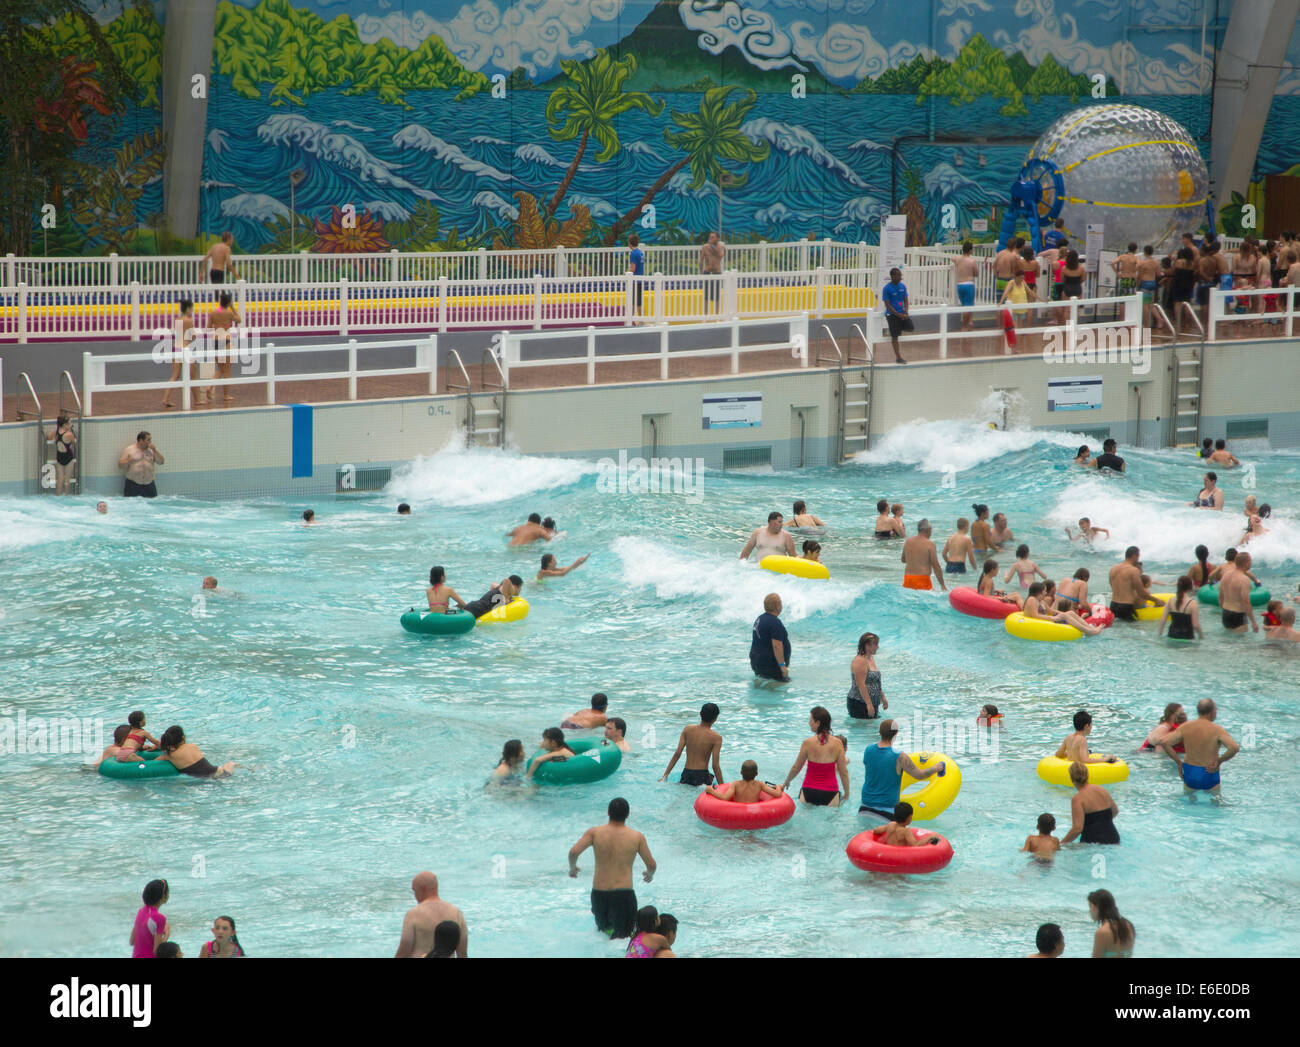 Wave pool at World Waterpark in West Edmonton mall, one of the largest shopping centers in the world. Stock Photo